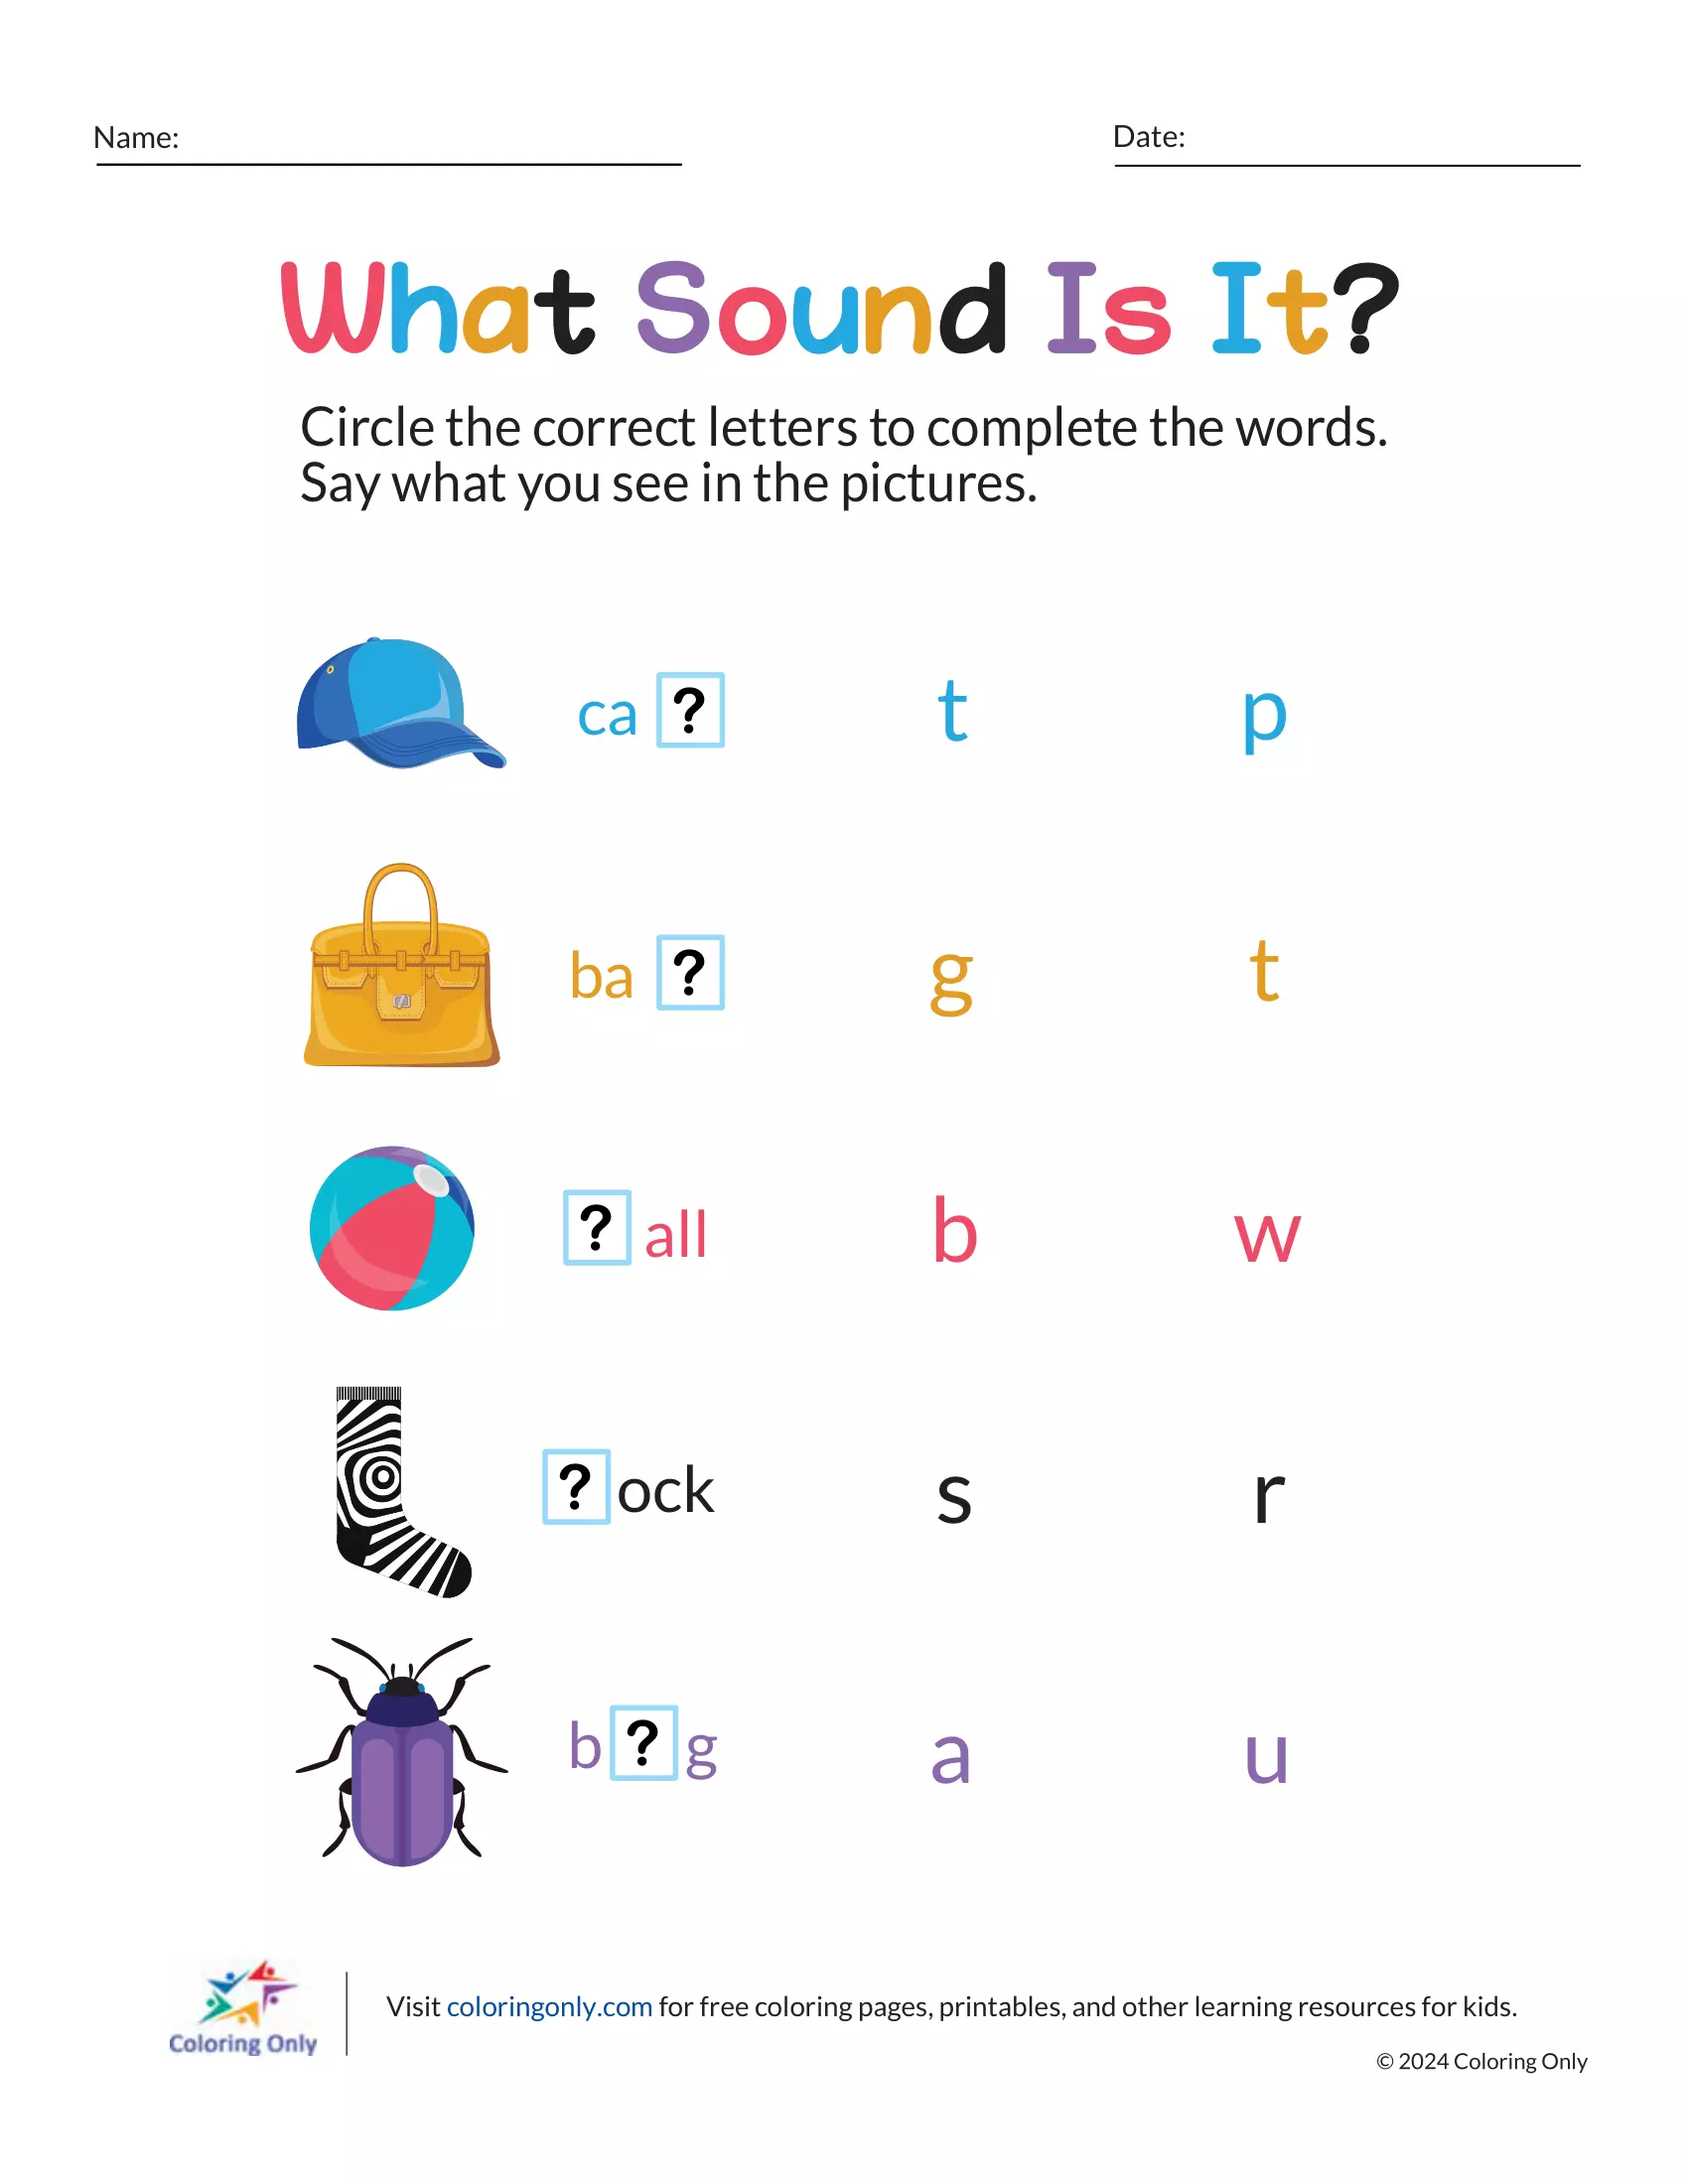 Spark early reading skills with this free printable phonics worksheet for preschoolers, titled "What Sound Is It?".